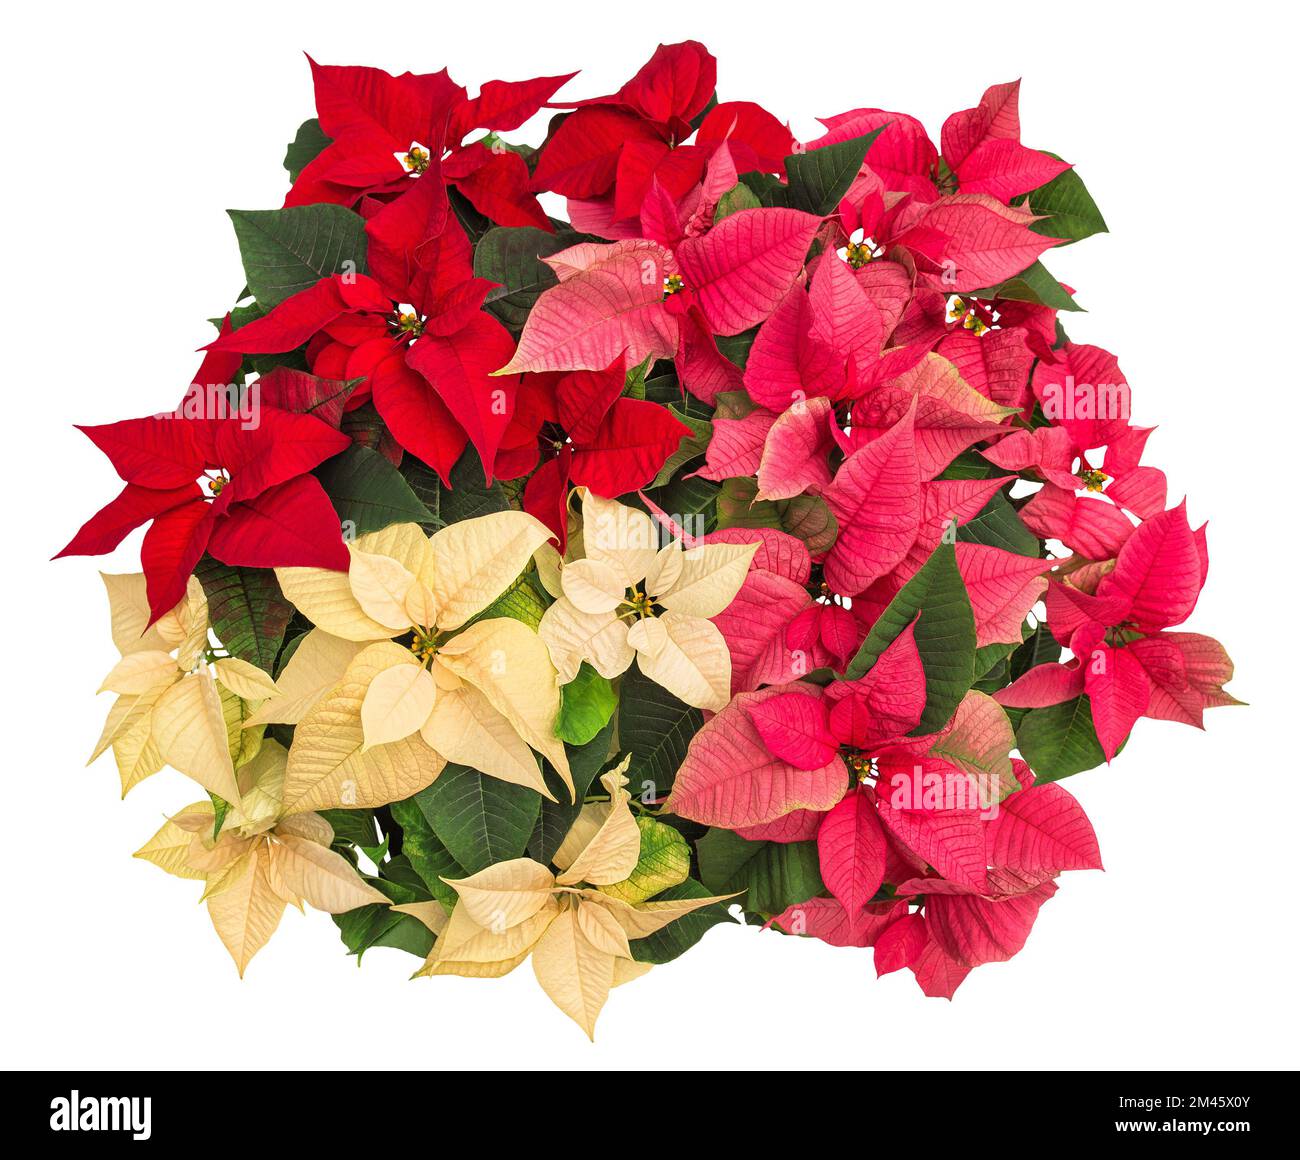 Poinsettia flowers. Christmas floral decoration isolated Stock Photo